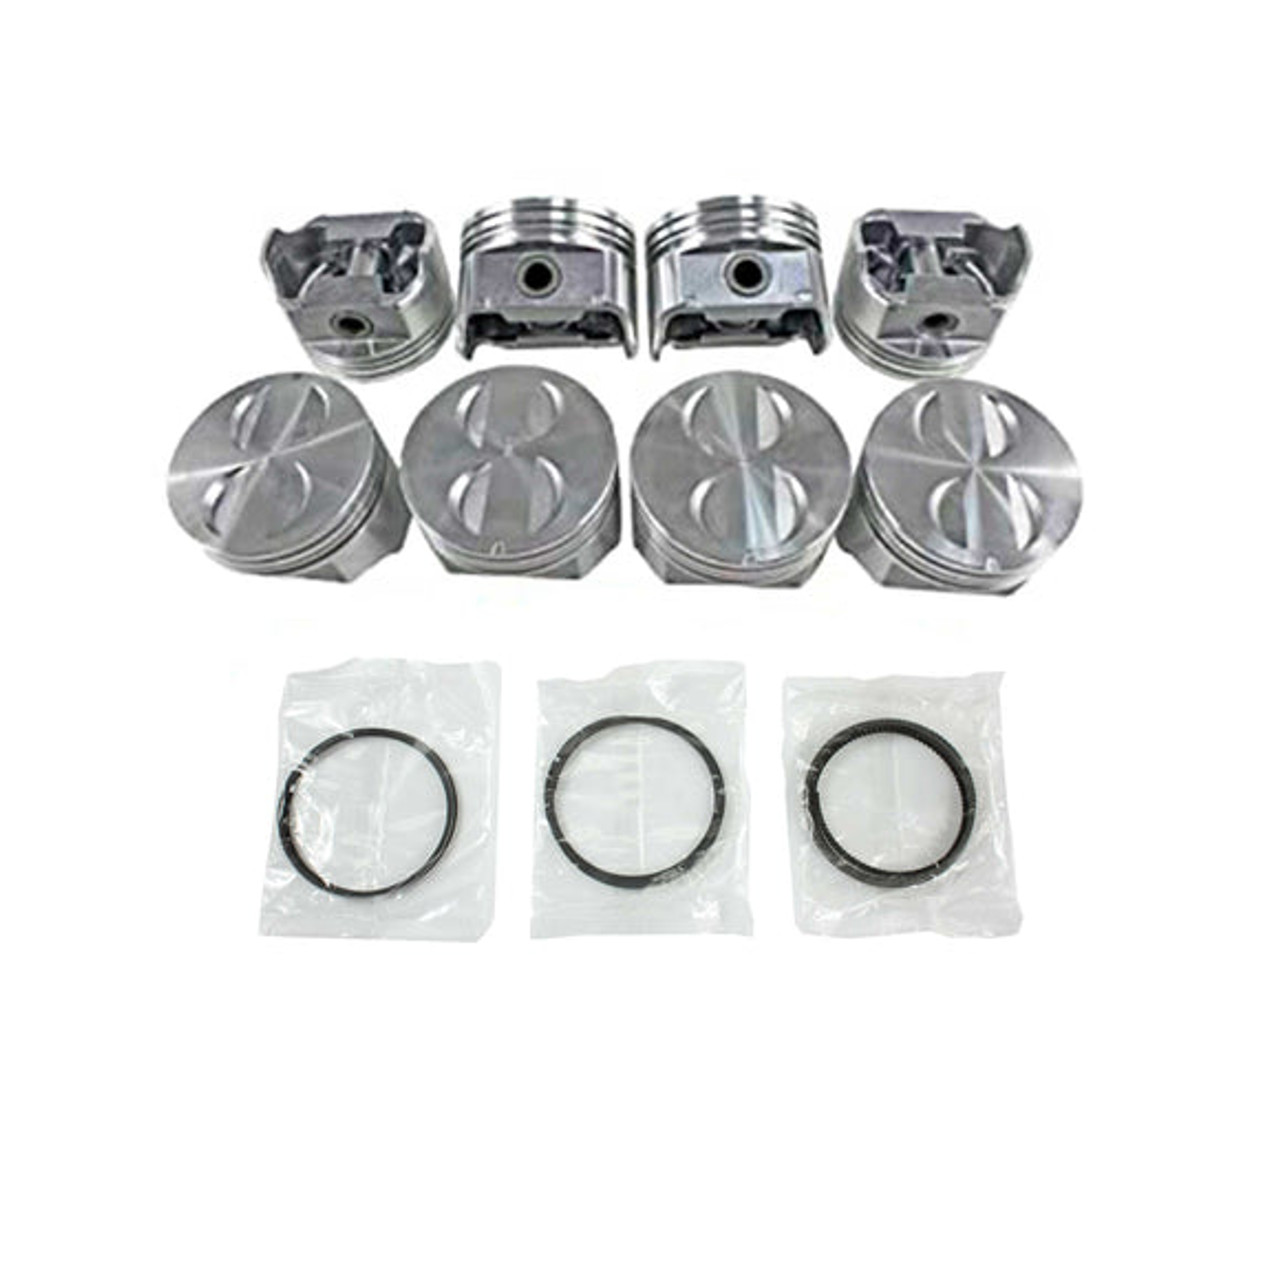 Piston Set with Rings - 2013 GMC Acadia 3.6L Engine Parts # PRK3212ZE71